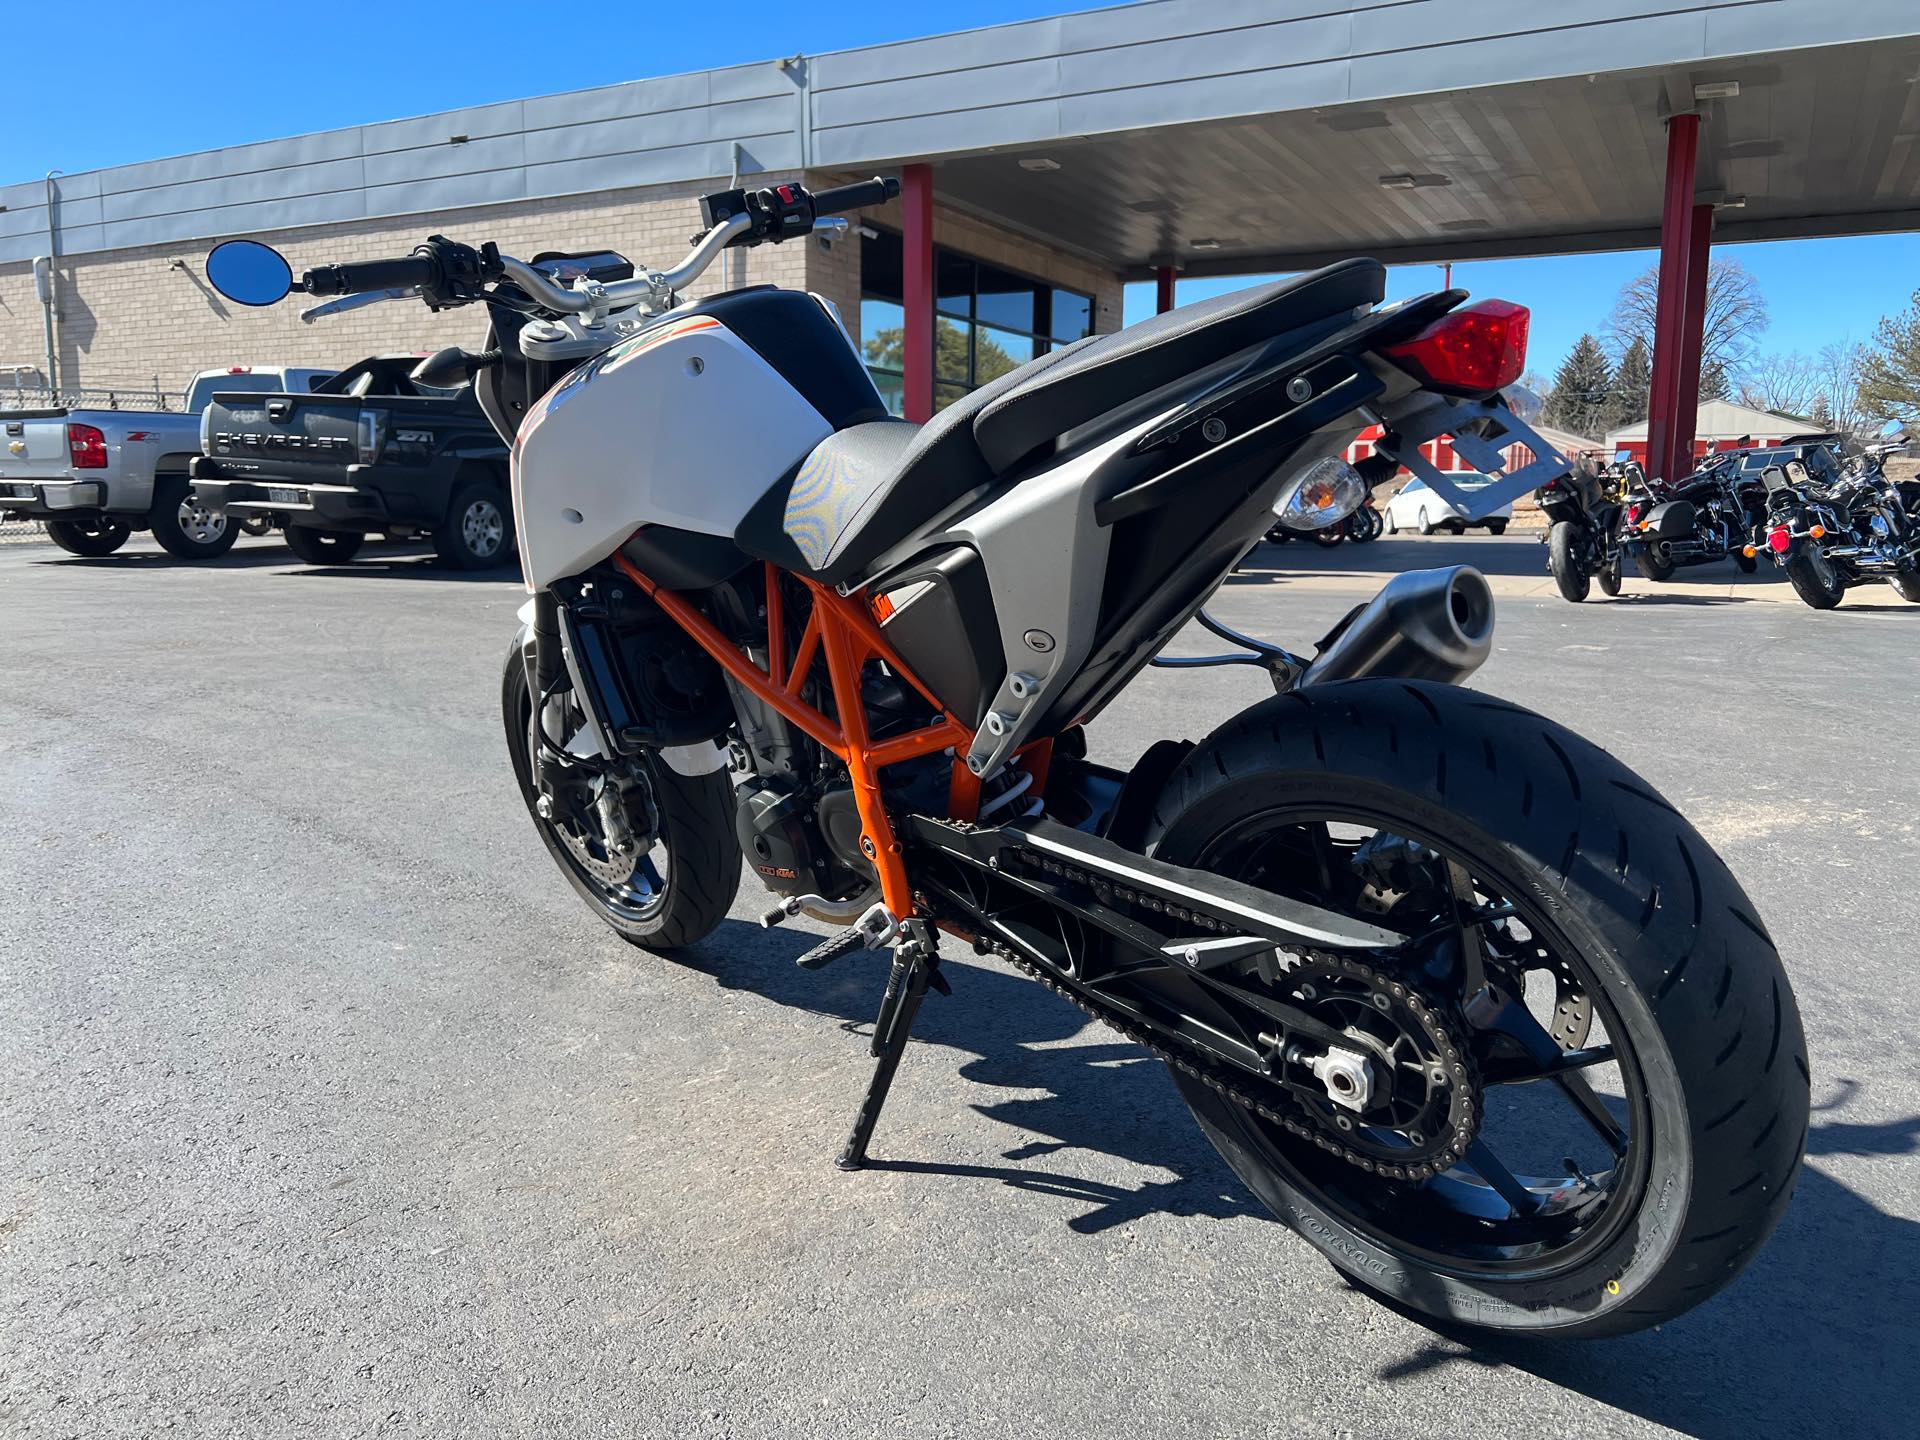 2014 KTM Duke 690 ABS at Aces Motorcycles - Fort Collins